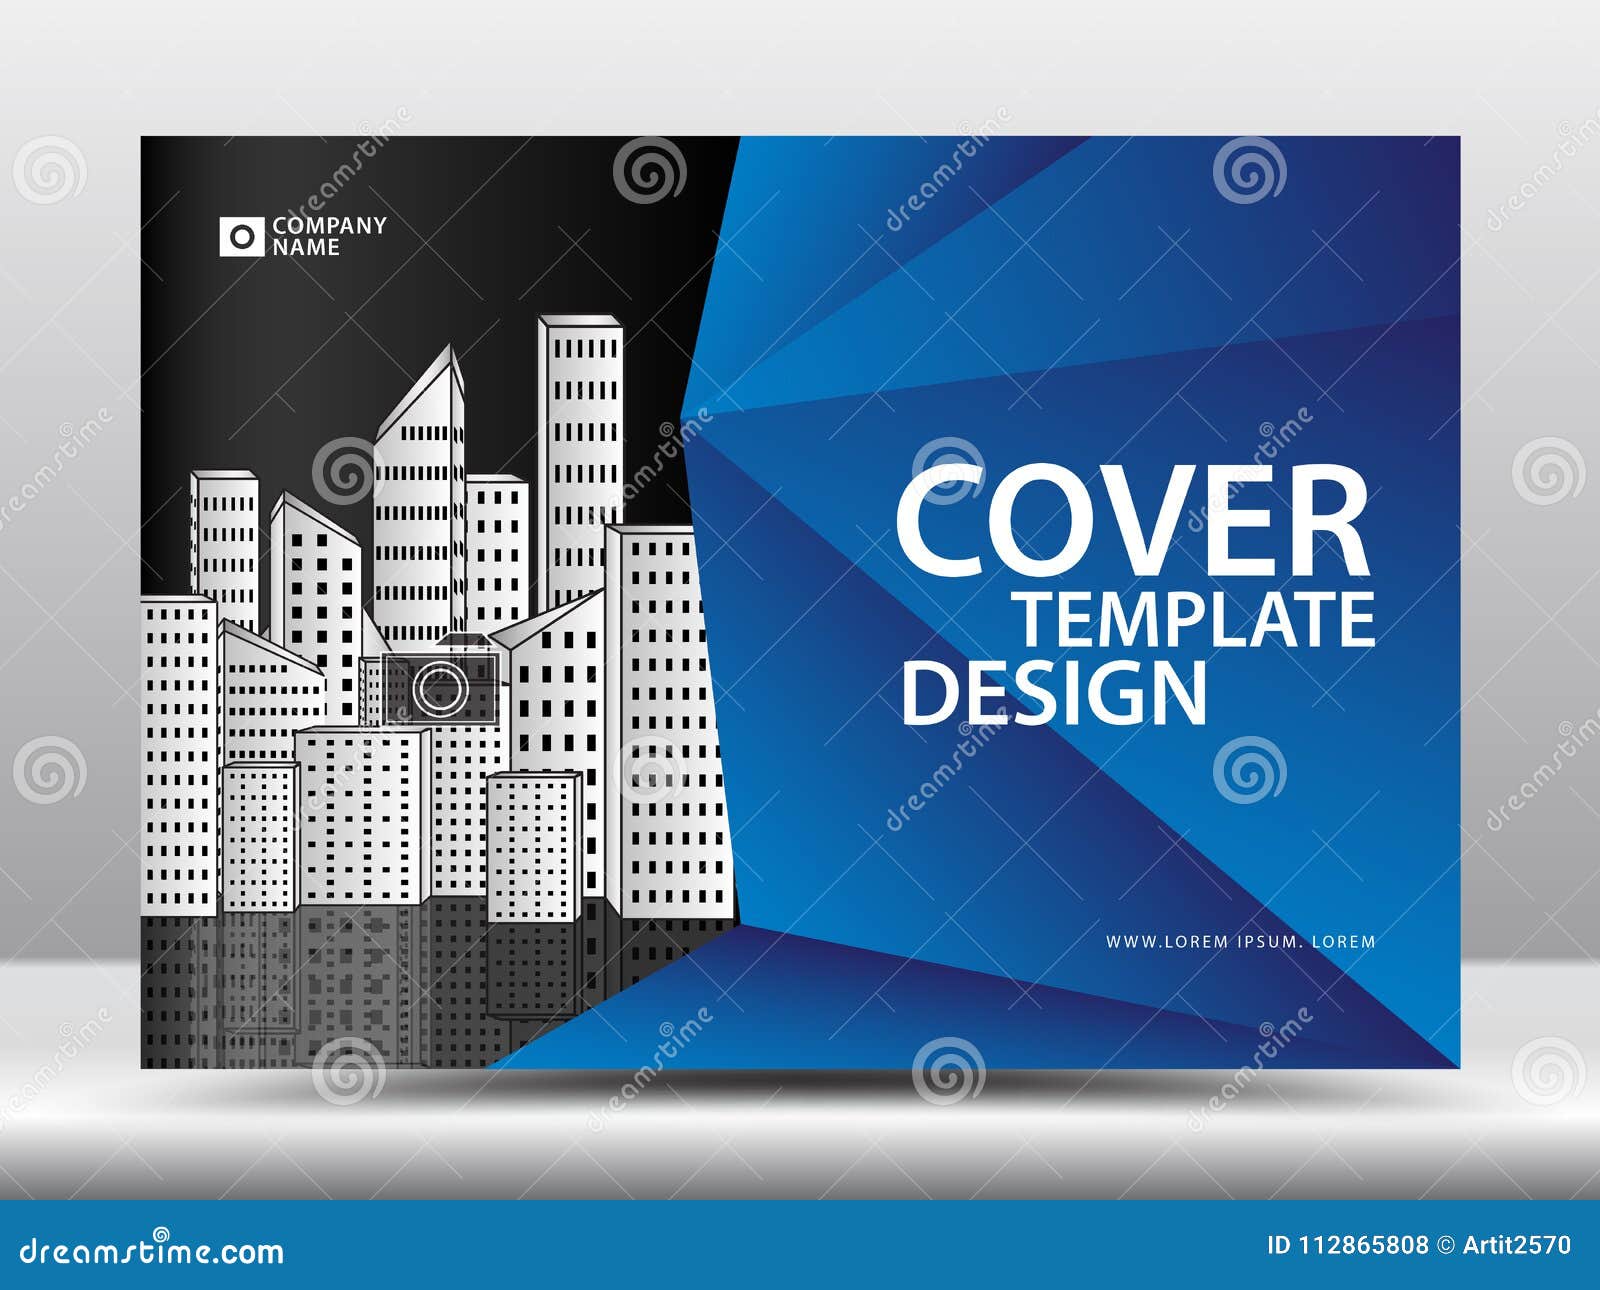 Blue Cover Template for Business Industry, Real Estate, Building With Real Estate Report Template